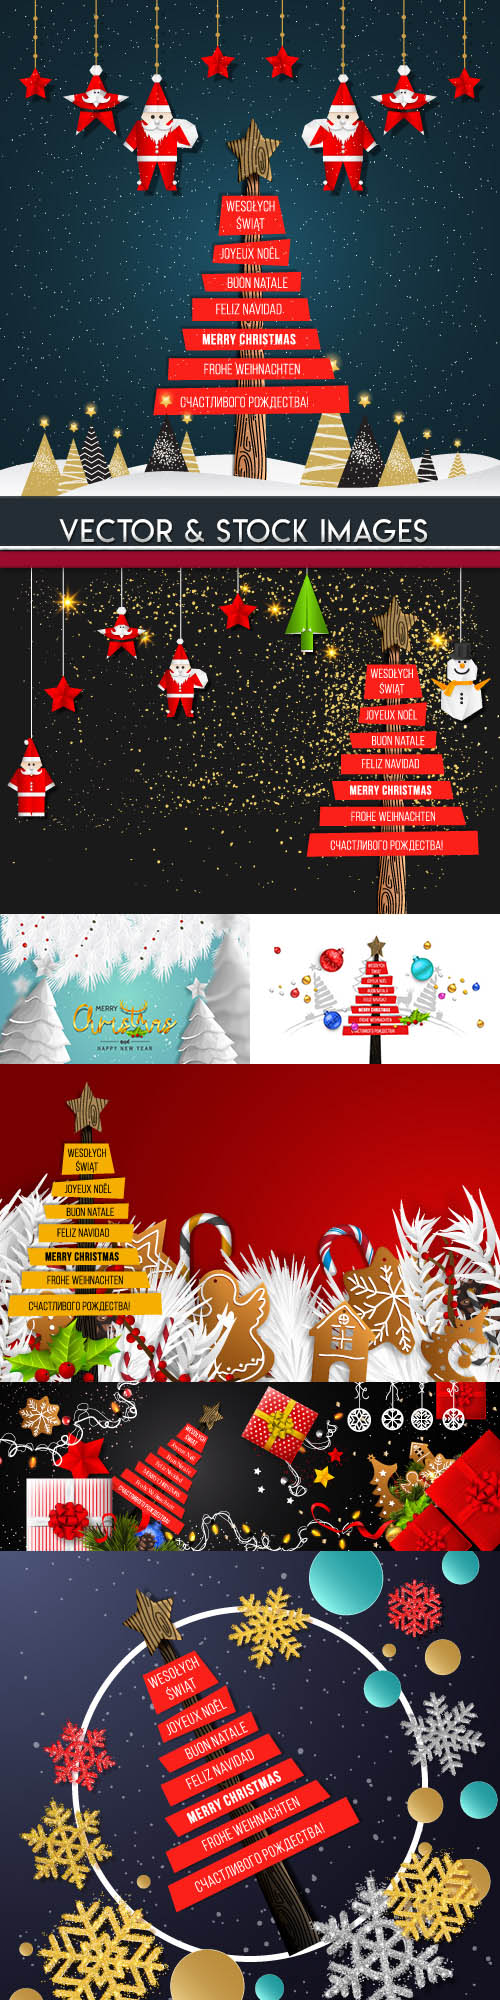 New Year and Christmas decorative 2020 illustration 3